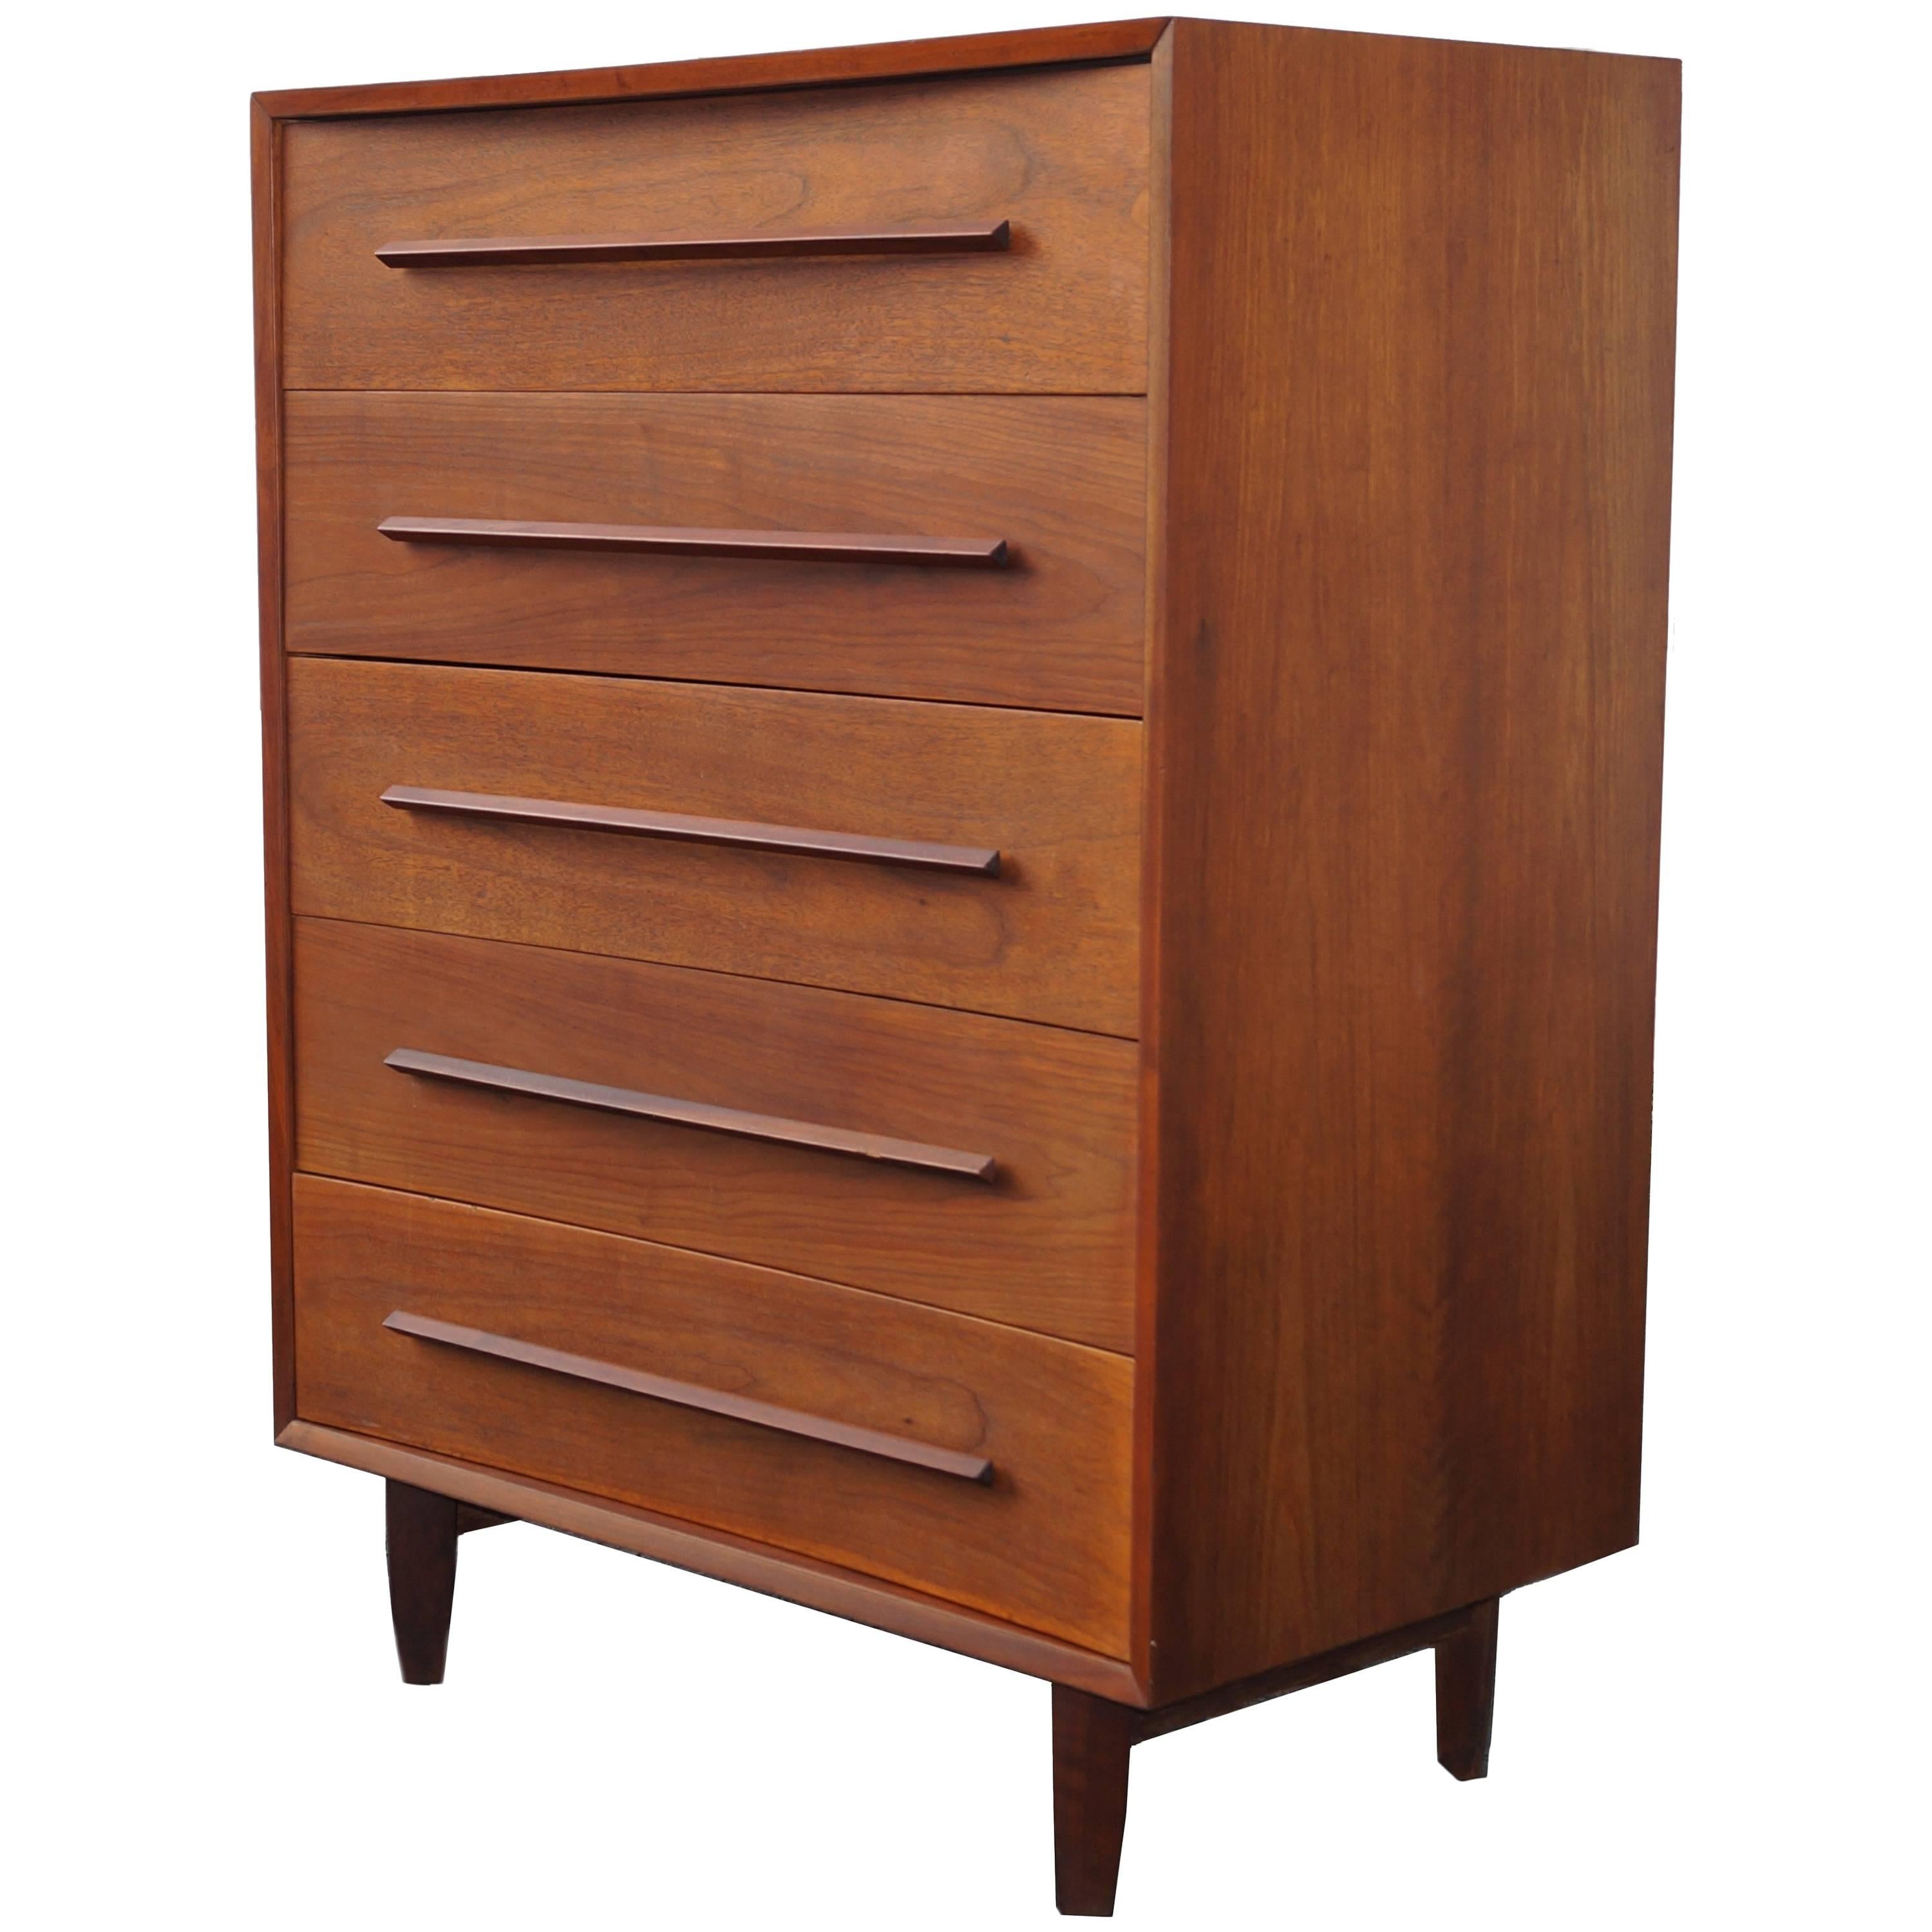 Widdicomb Sculpted Highboy Chest of Drawers Dresser Manner of George Nakashima